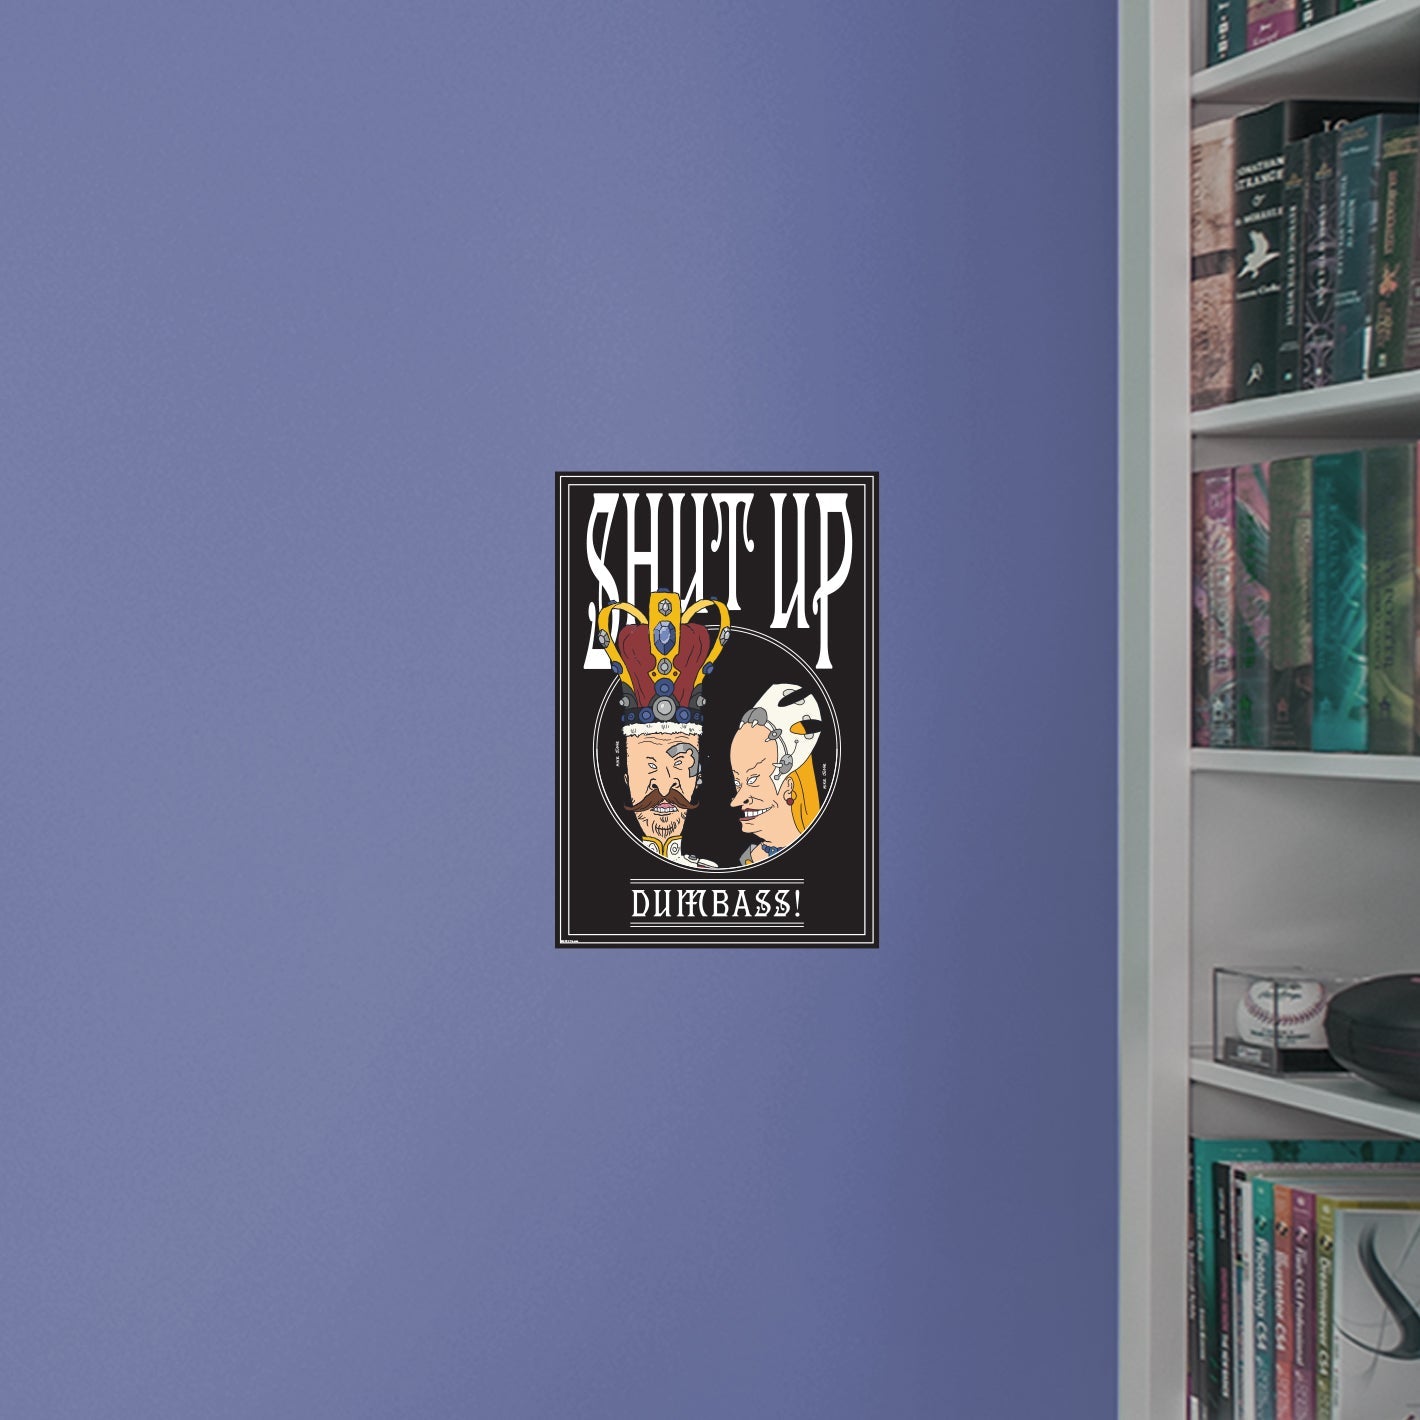 Beavis & Butt-Head: Beavis & Butt-Head Shut Up Poster - Officially Licensed Paramount Removable Adhesive Decal